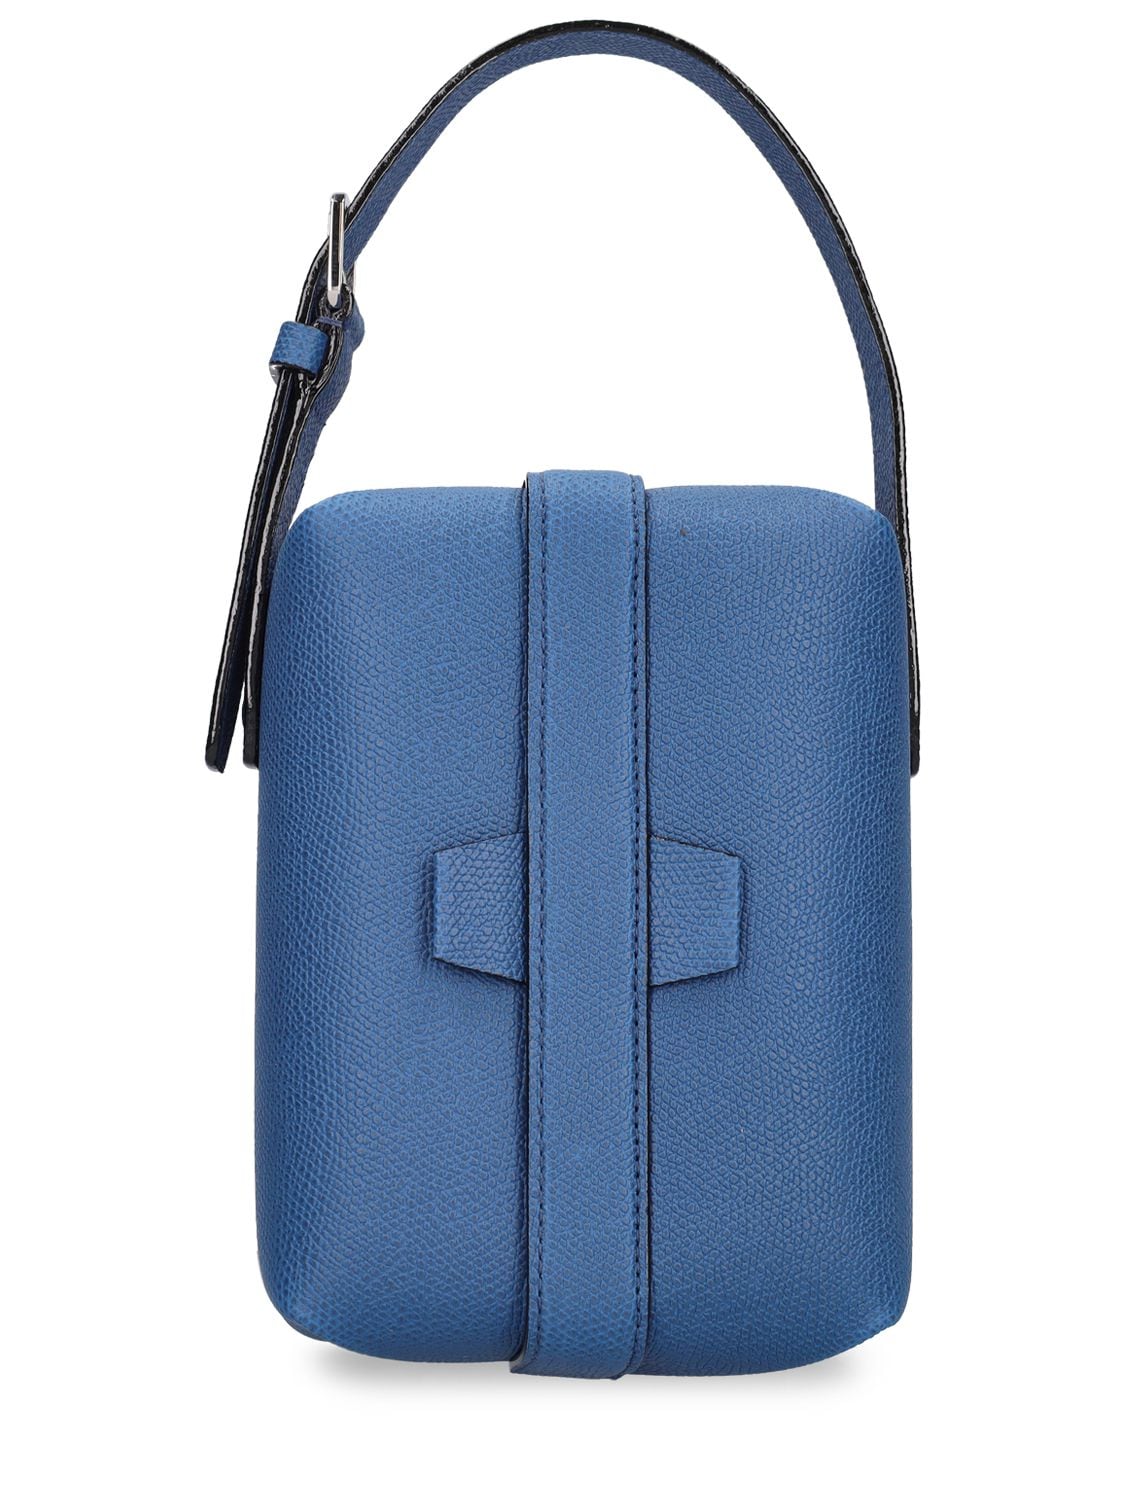 Valextra Tric Trac Leather Top Handle Bag In Denim